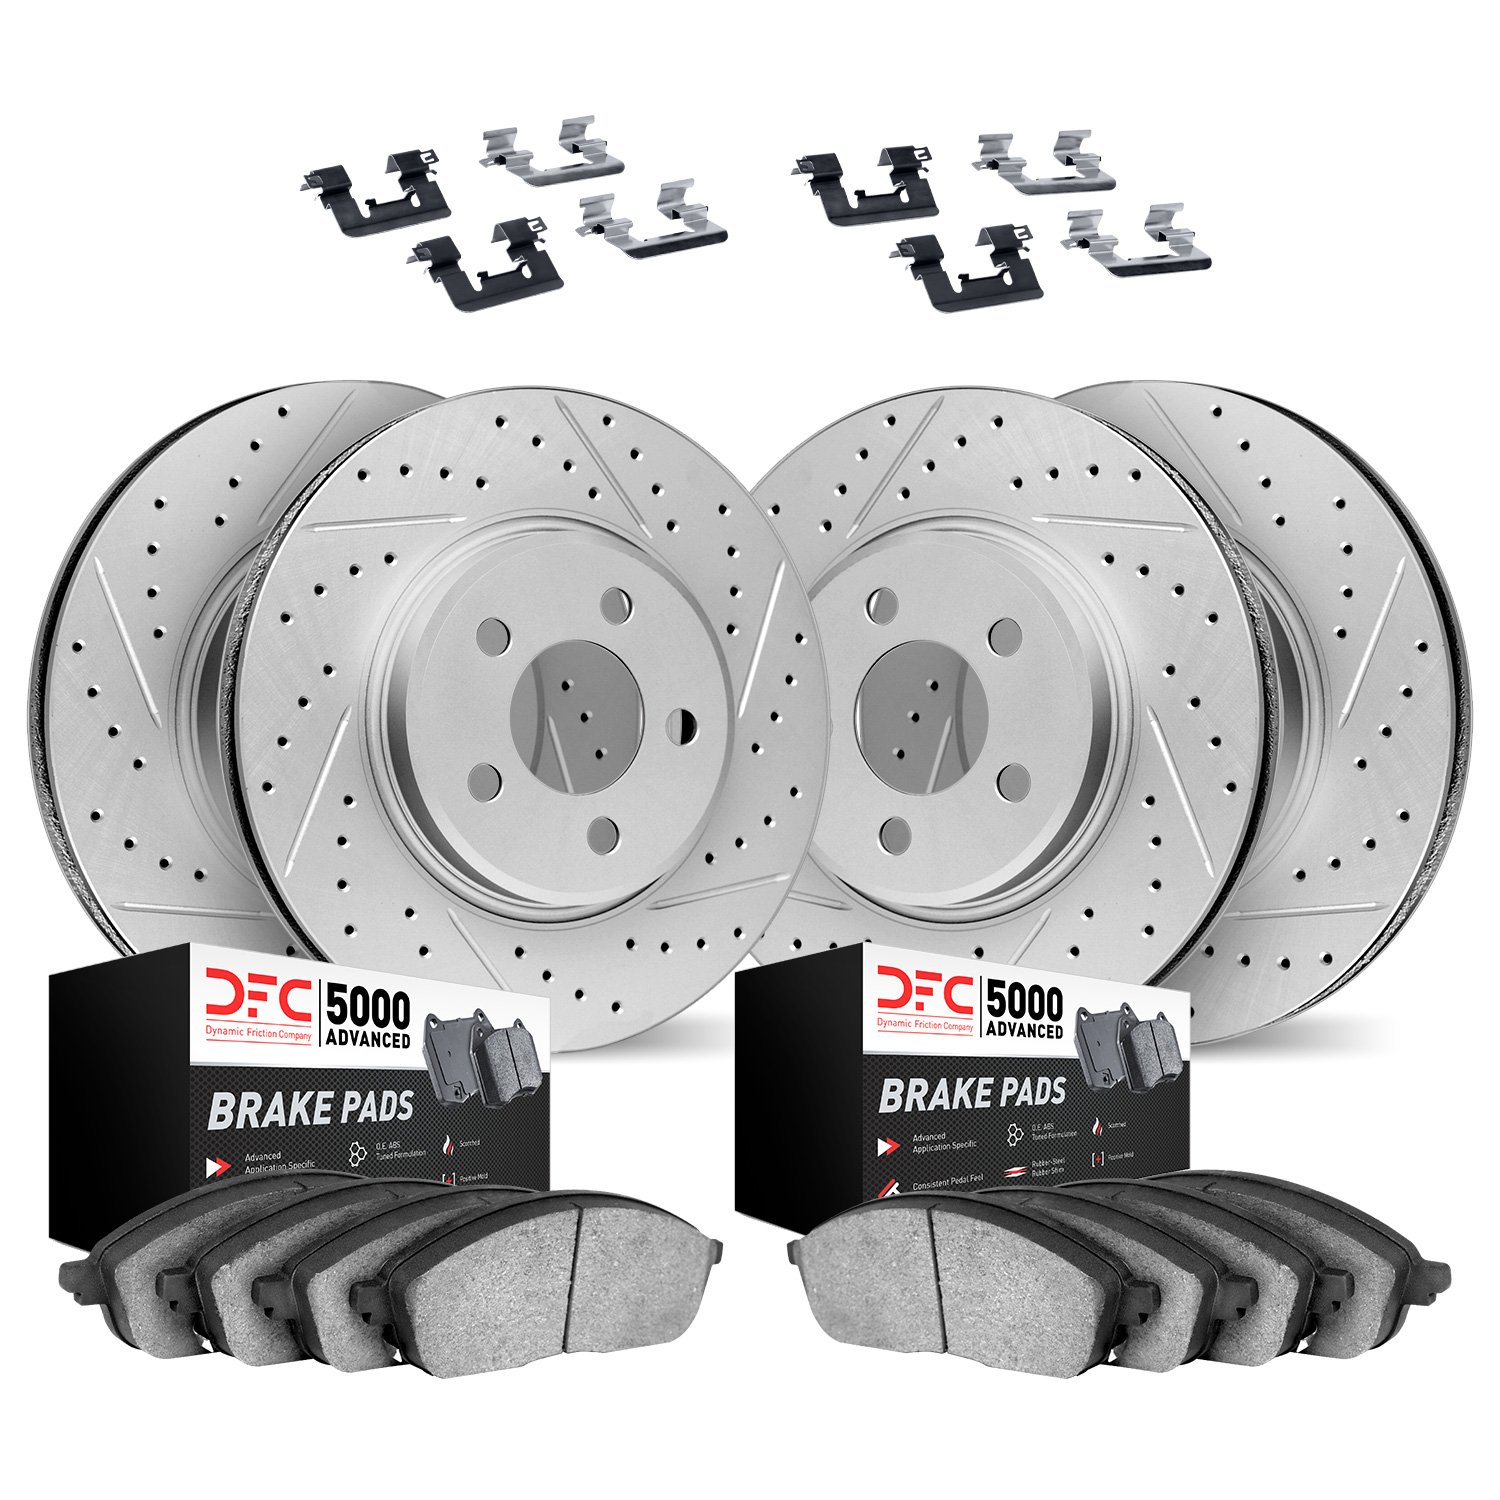 2514-39012 Geoperformance Drilled/Slotted Rotors w/5000 Advanced Brake Pads Kit & Hardware, 2005-2020 Mopar, Position: Front and